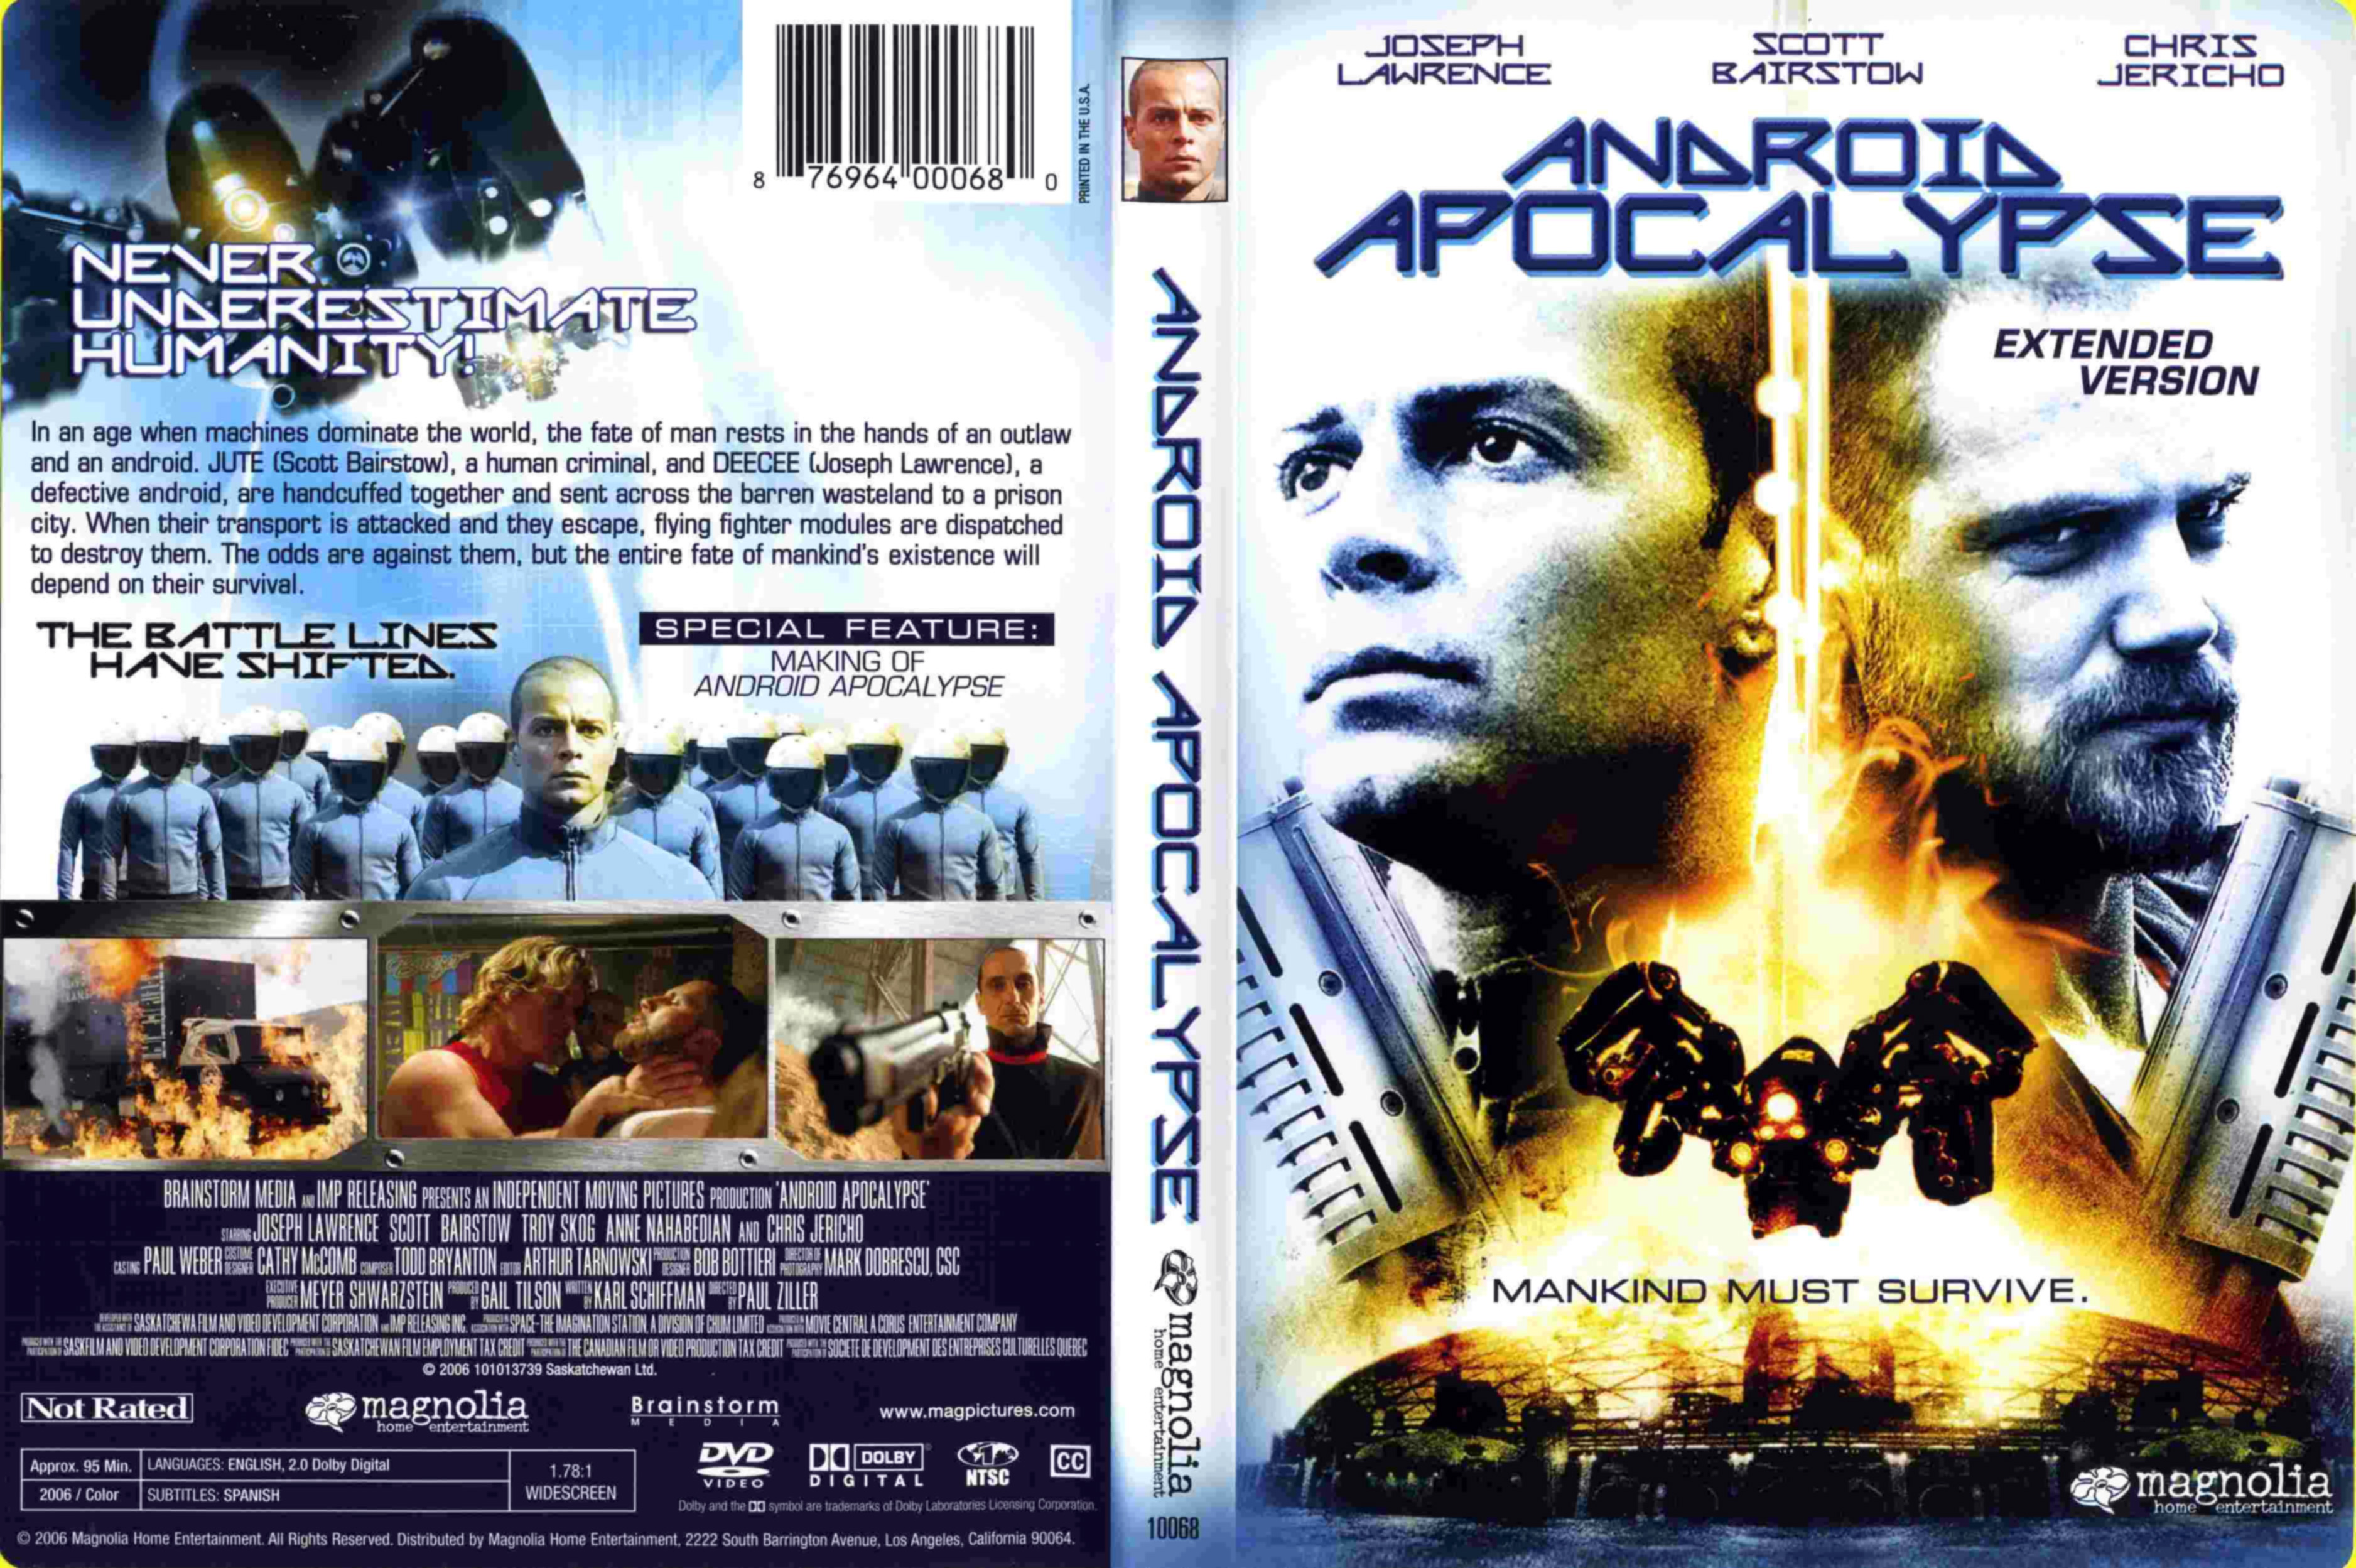 Jaquette DVD Android apocalypse Zone 1